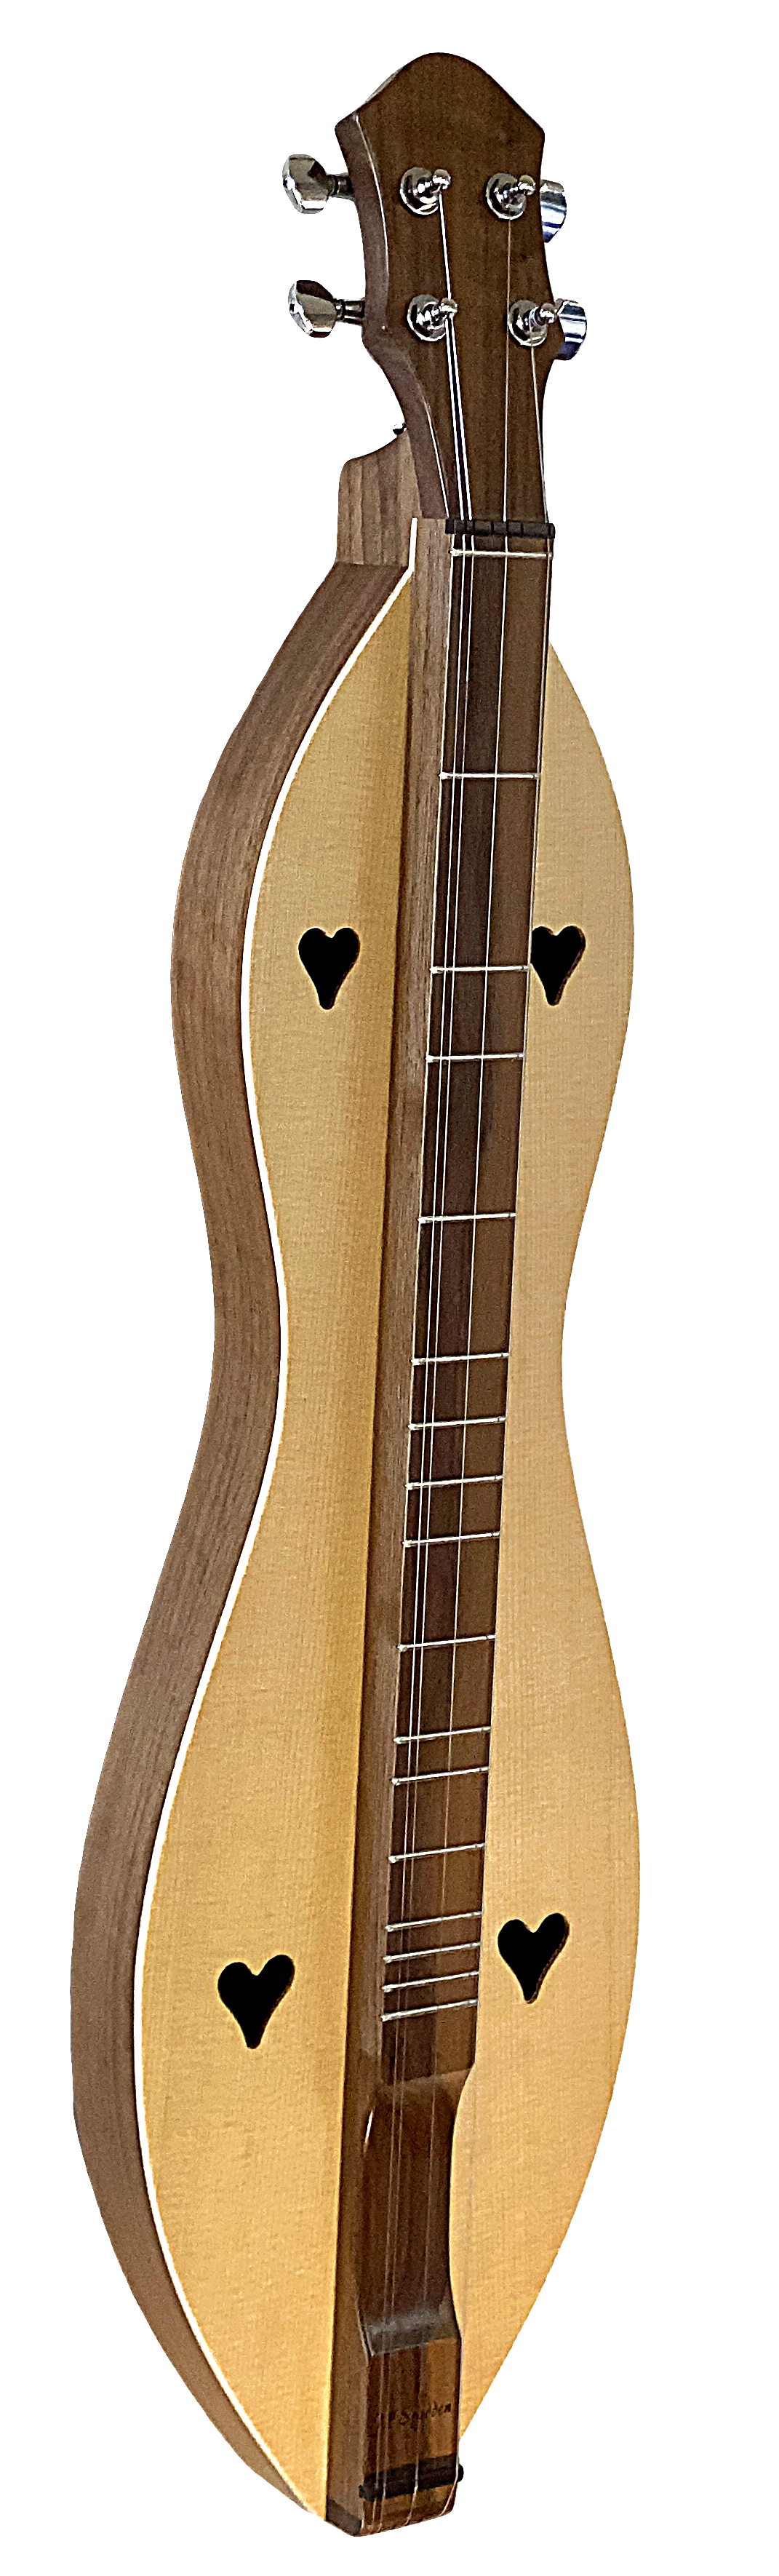 4 String Ginger, Flathead, Hourglass with Walnut back and sides, Spruce top (4FGWS)